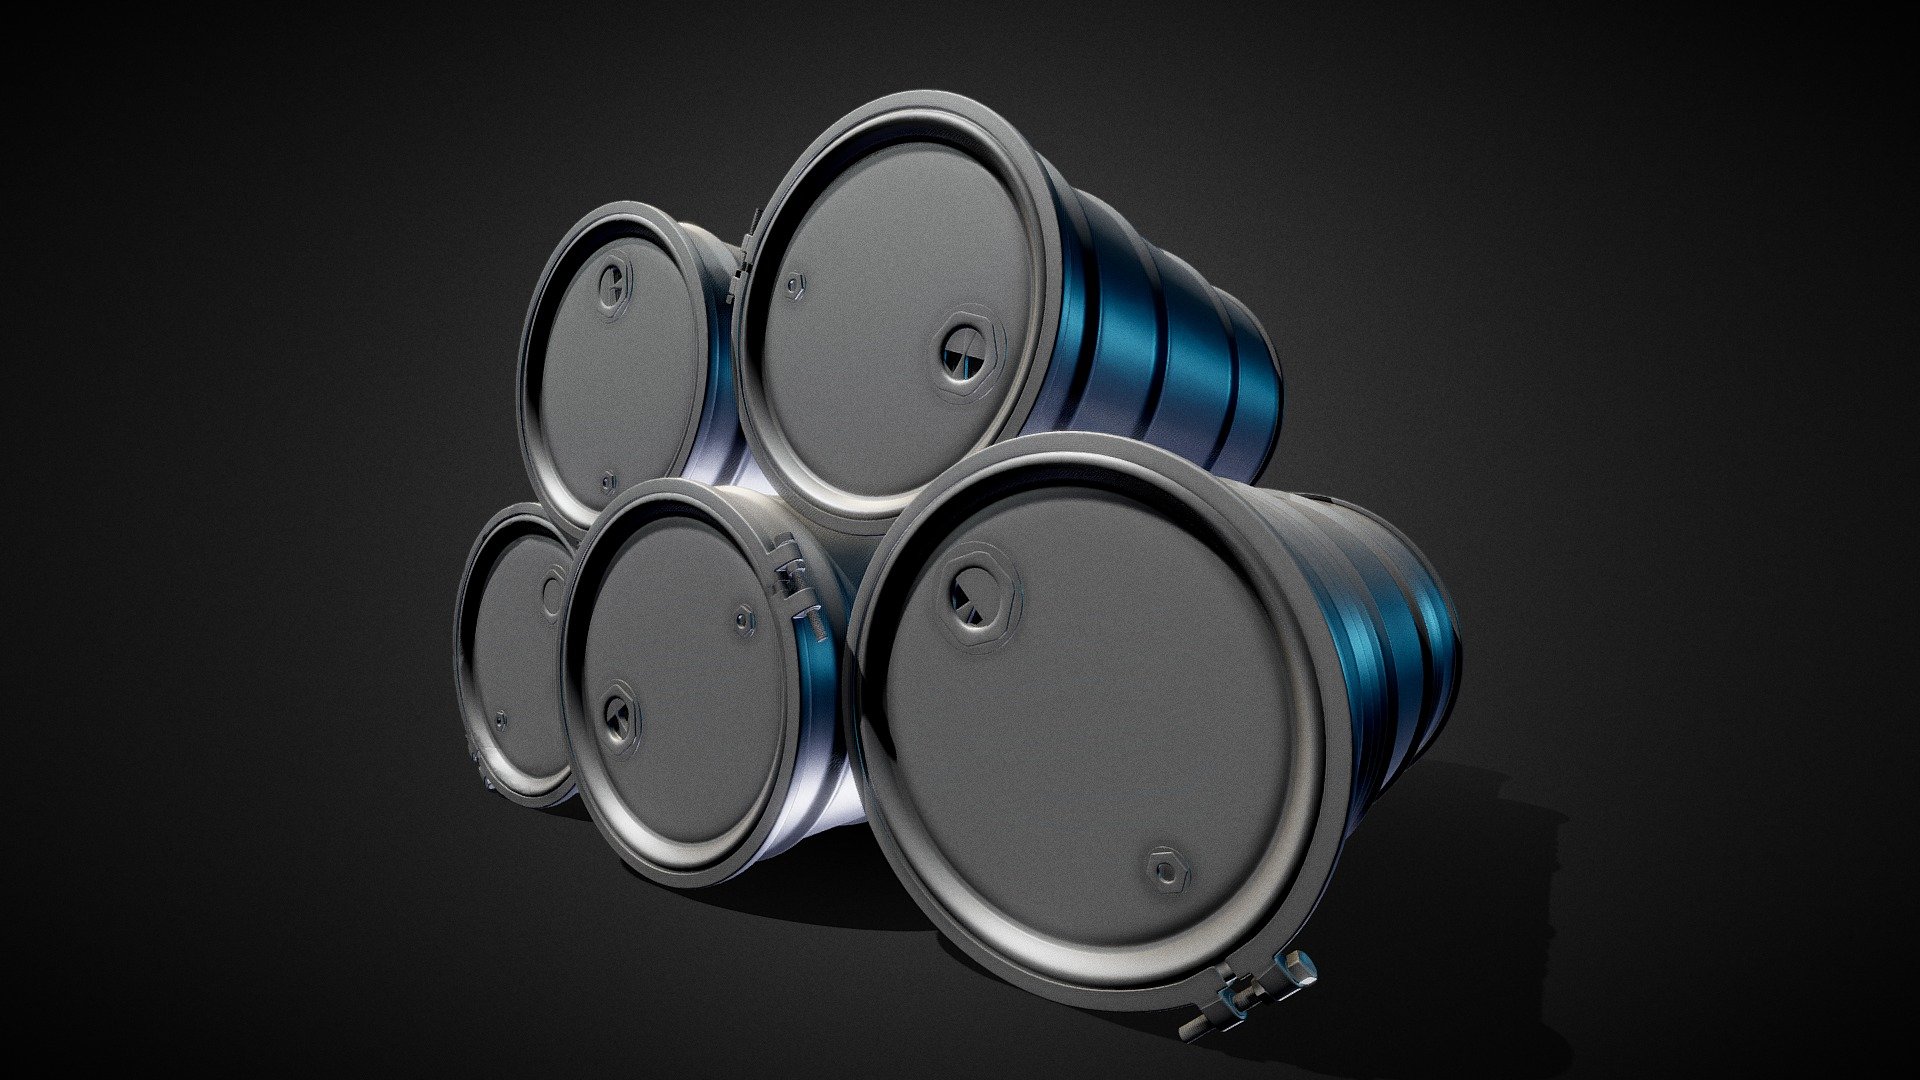 3D High-Poly Drum Barrels! Excellent asset for 3D Environment Artist to extract high-poly details for textures maps and create game assets! Makes a great hero piece and landmark for your 3D project!

Features:
Additional Maya fille, sub-division ready, for further editing for additional detail!
3 Different Steel Drum variations!

An excellent 3D asset for 3D game development or your personal project!
Purchase Today! - 3D Steel Drum Barrels - High Poly - Buy Royalty Free 3D model by Boney Toes (@boneytoes) 3d model